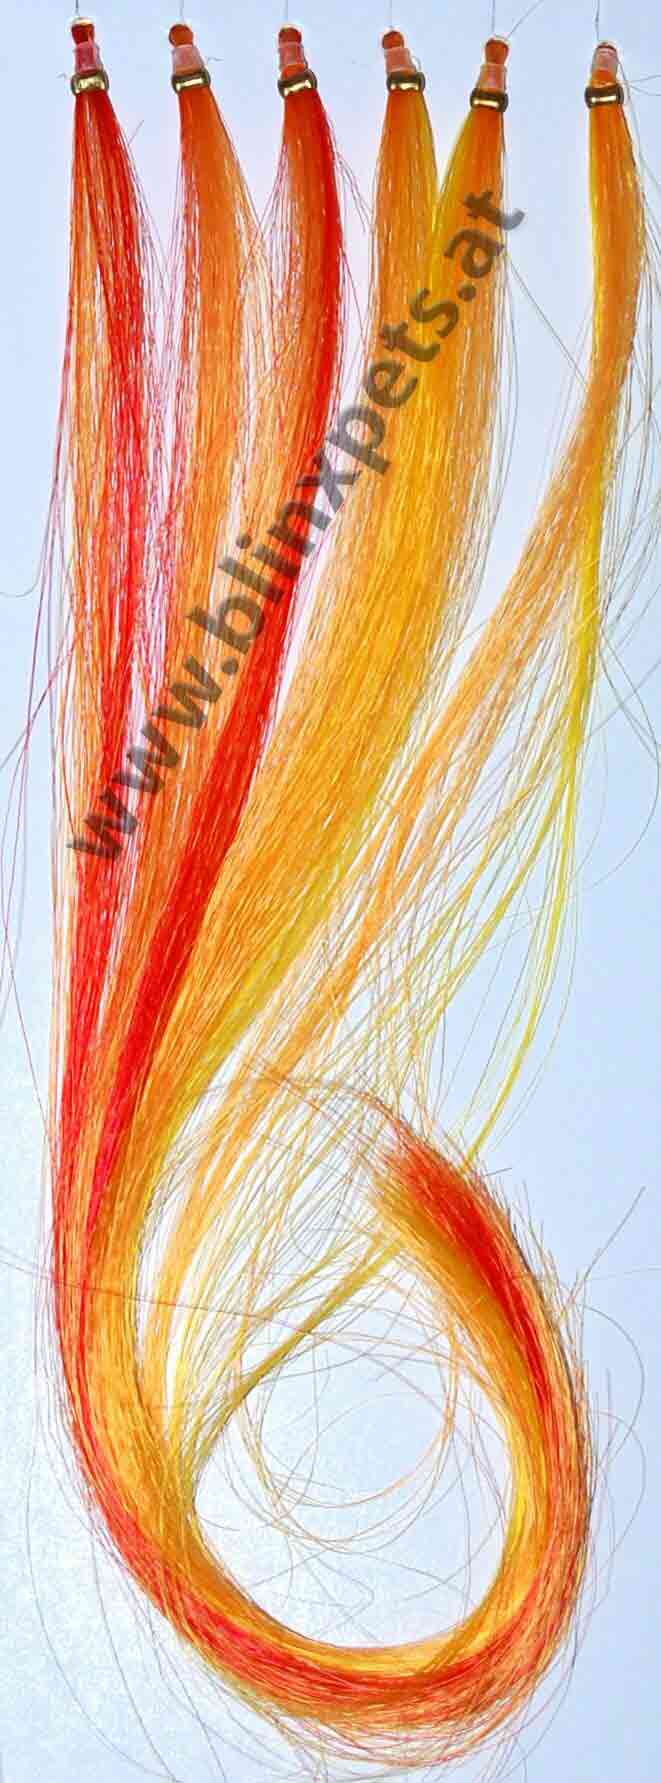 Funny Extension red - yellow hair extensions